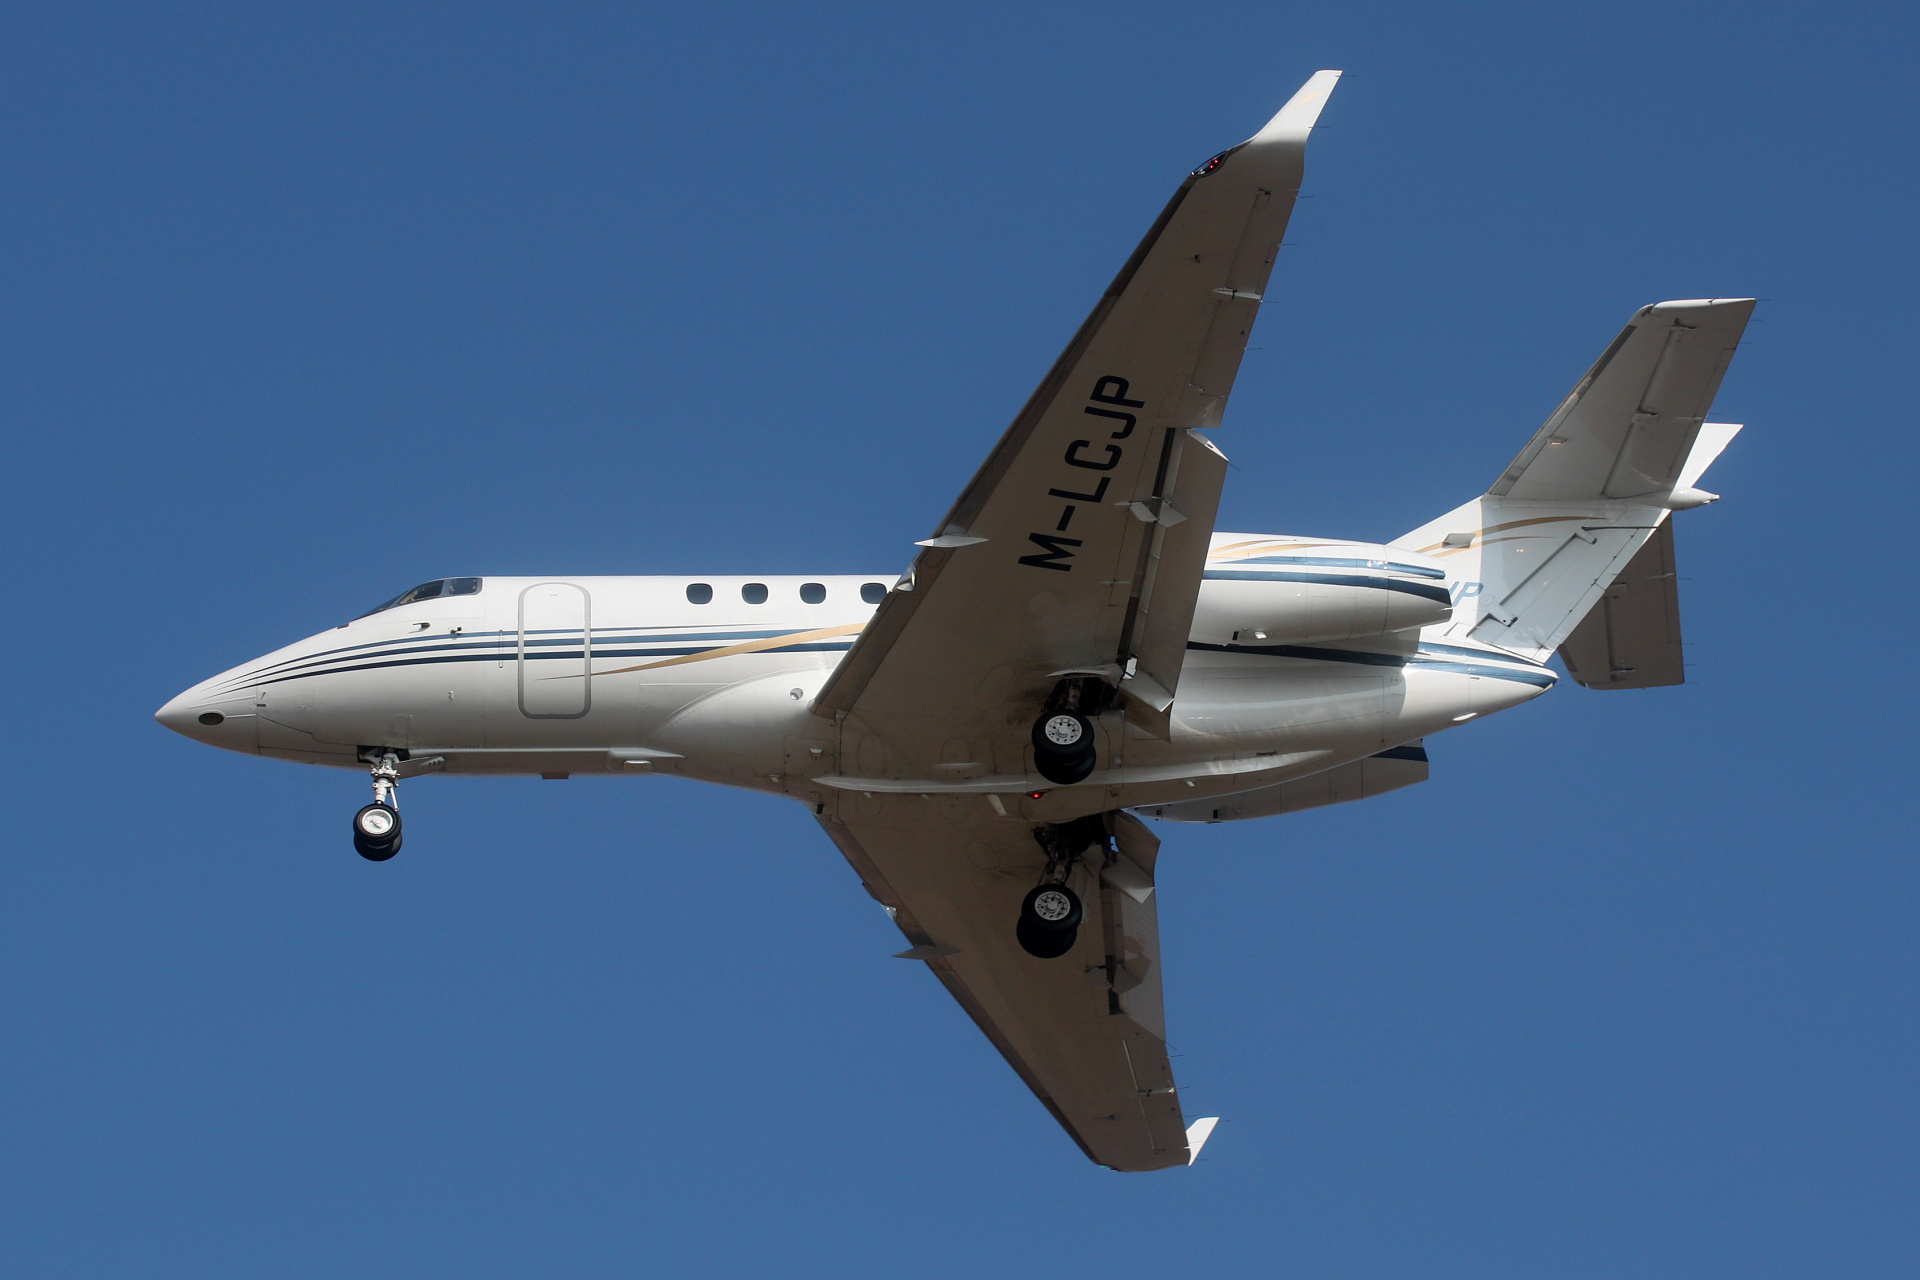 M-LCJP, LC Corp (Aircraft » EPWA Spotting » BAe 125 and revisions » Raytheon Hawker 900XP)